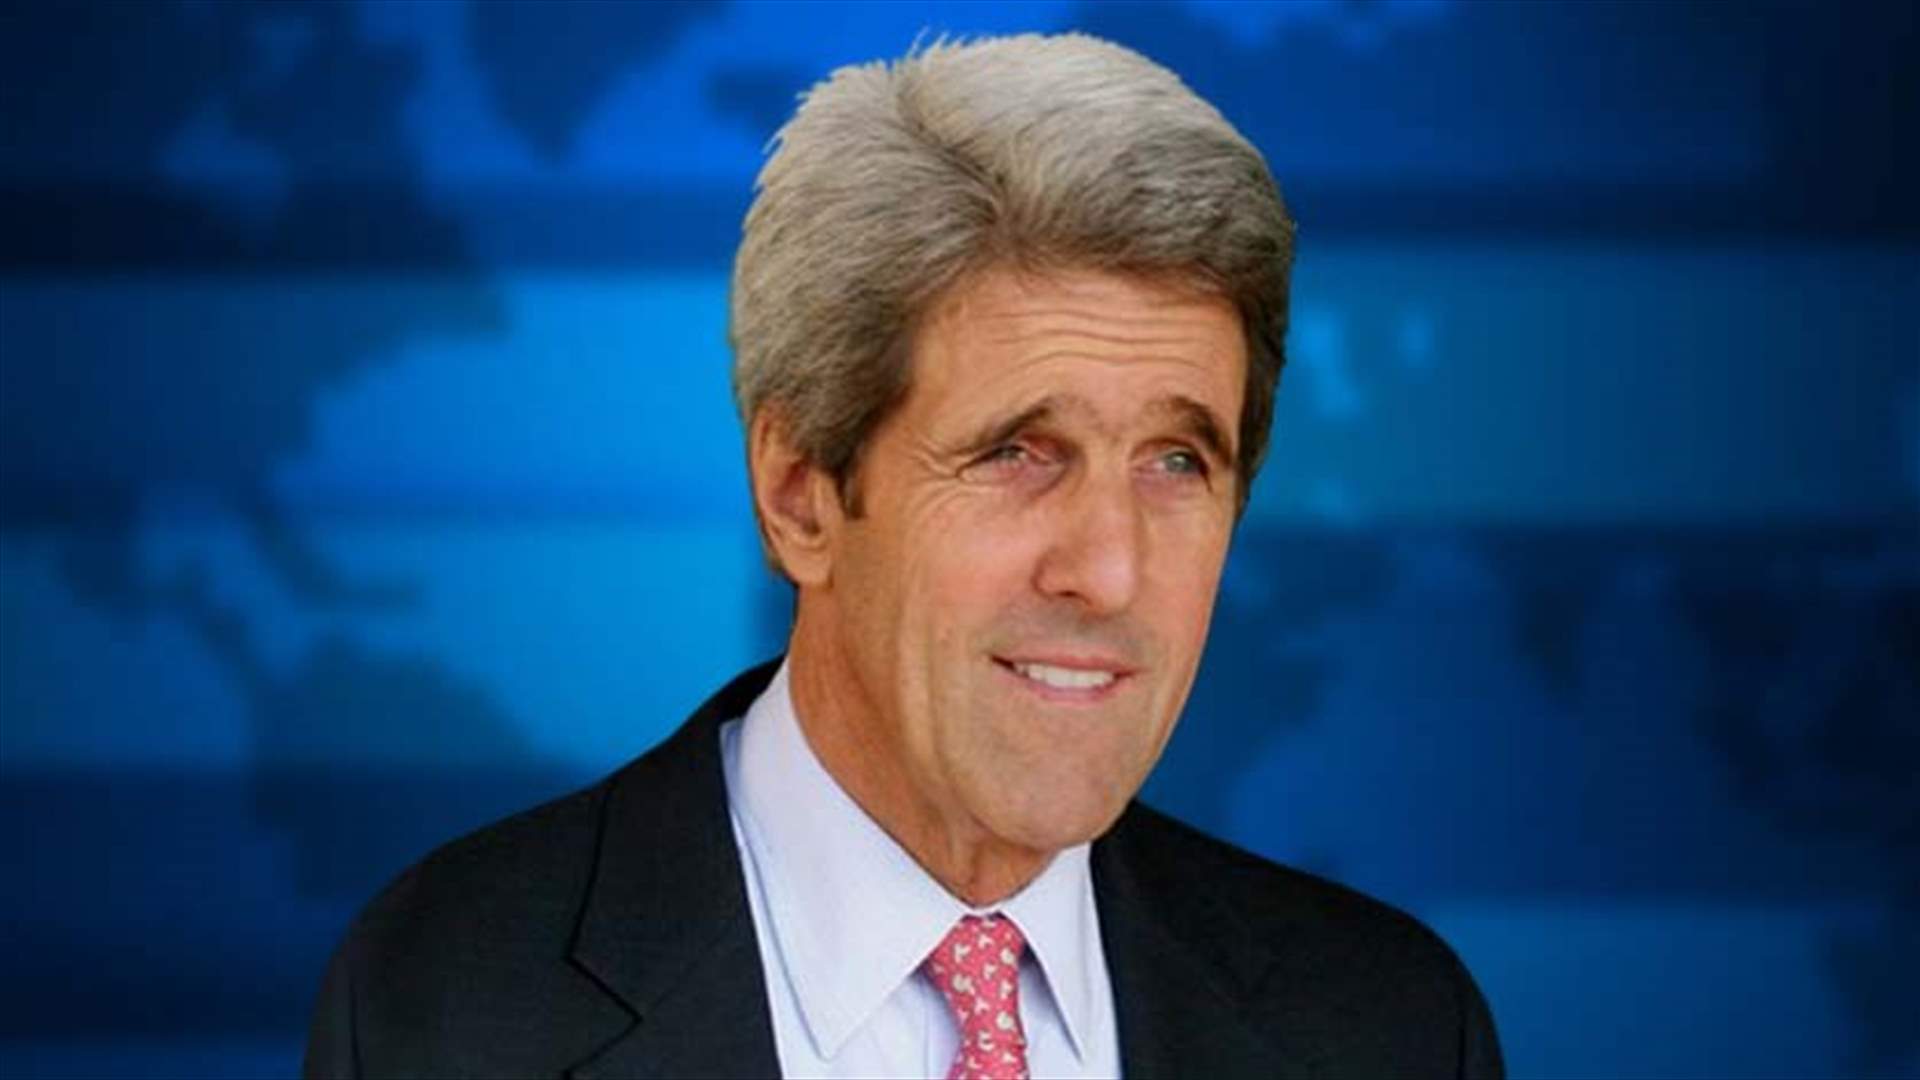 Kerry promises more U.S. help to EU after Brussels bombings, 2 Americans among dead   